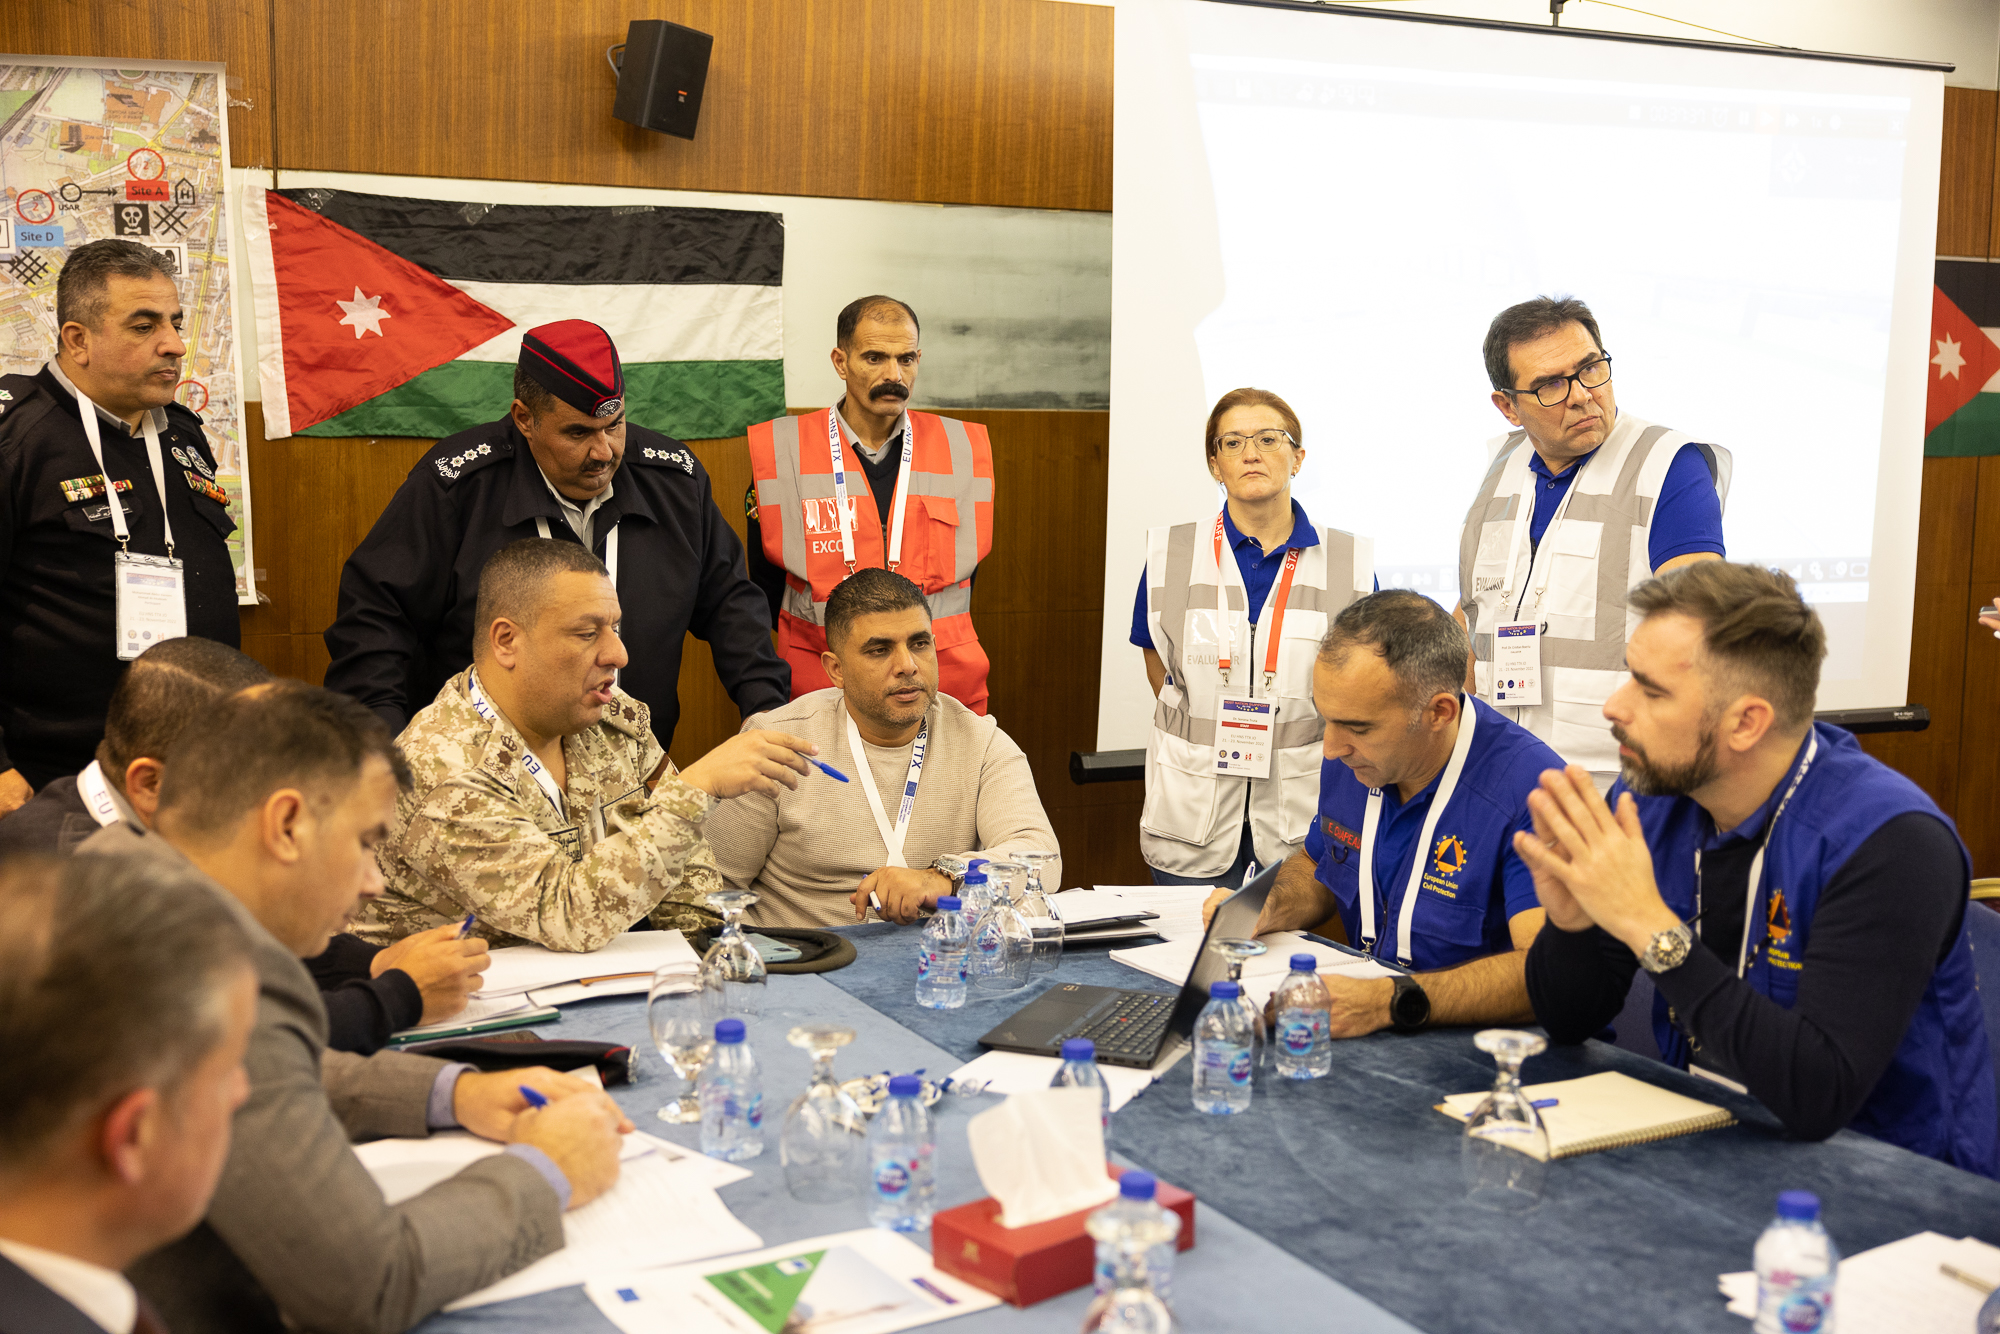 Discussion on HNS between Jordan Civil Defense and the Team Leader of the EUCPT